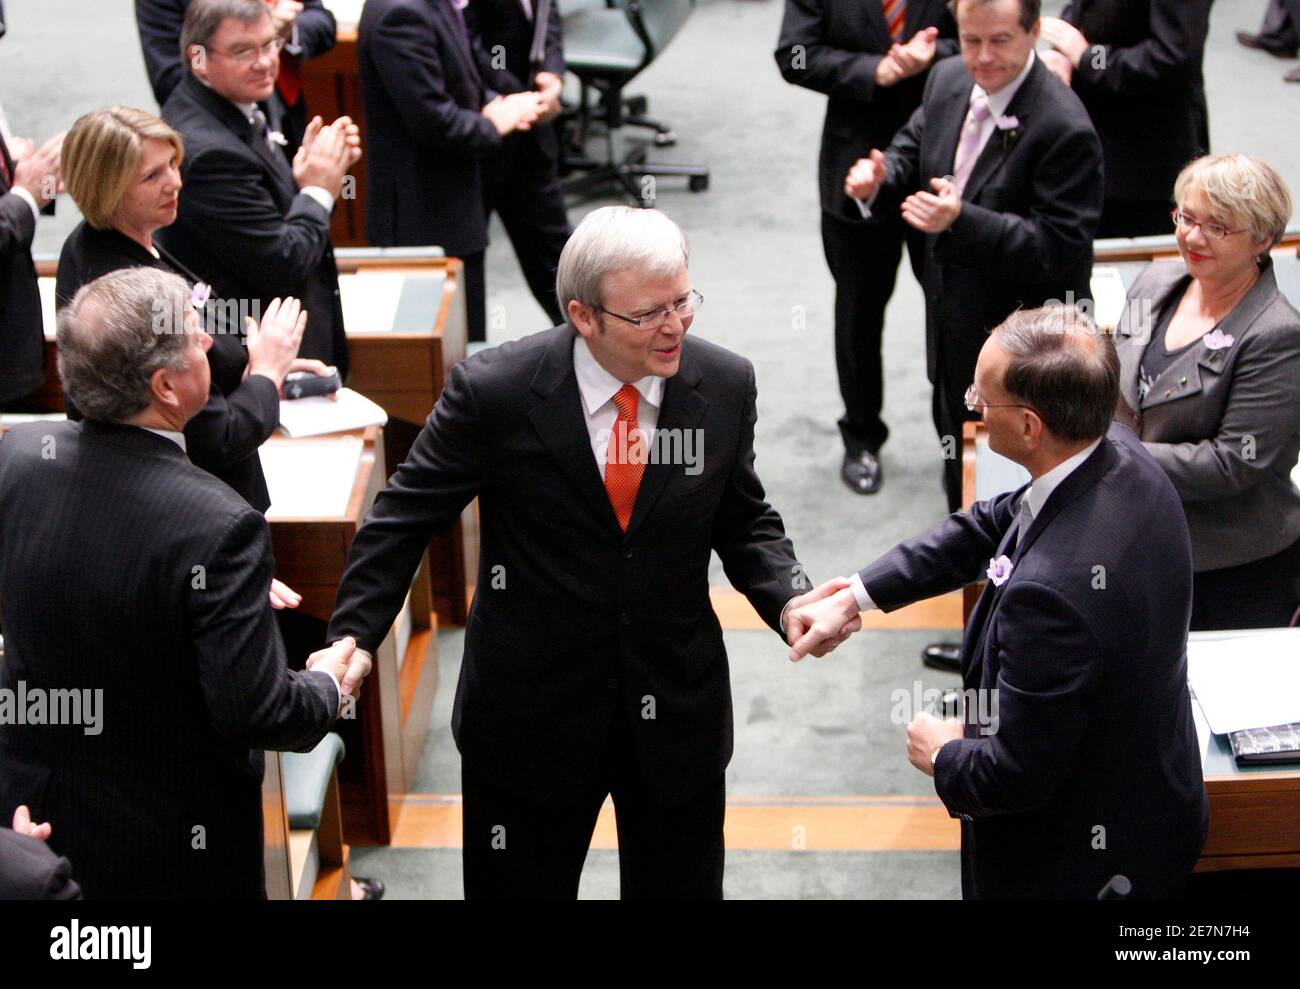 Australian Prime Minister Kevin Rudd (C) is congratulated by members of his  party after delivering an apology speech to the country's indigenous people  in Canberra February 13, 2008. Australia apologised for the